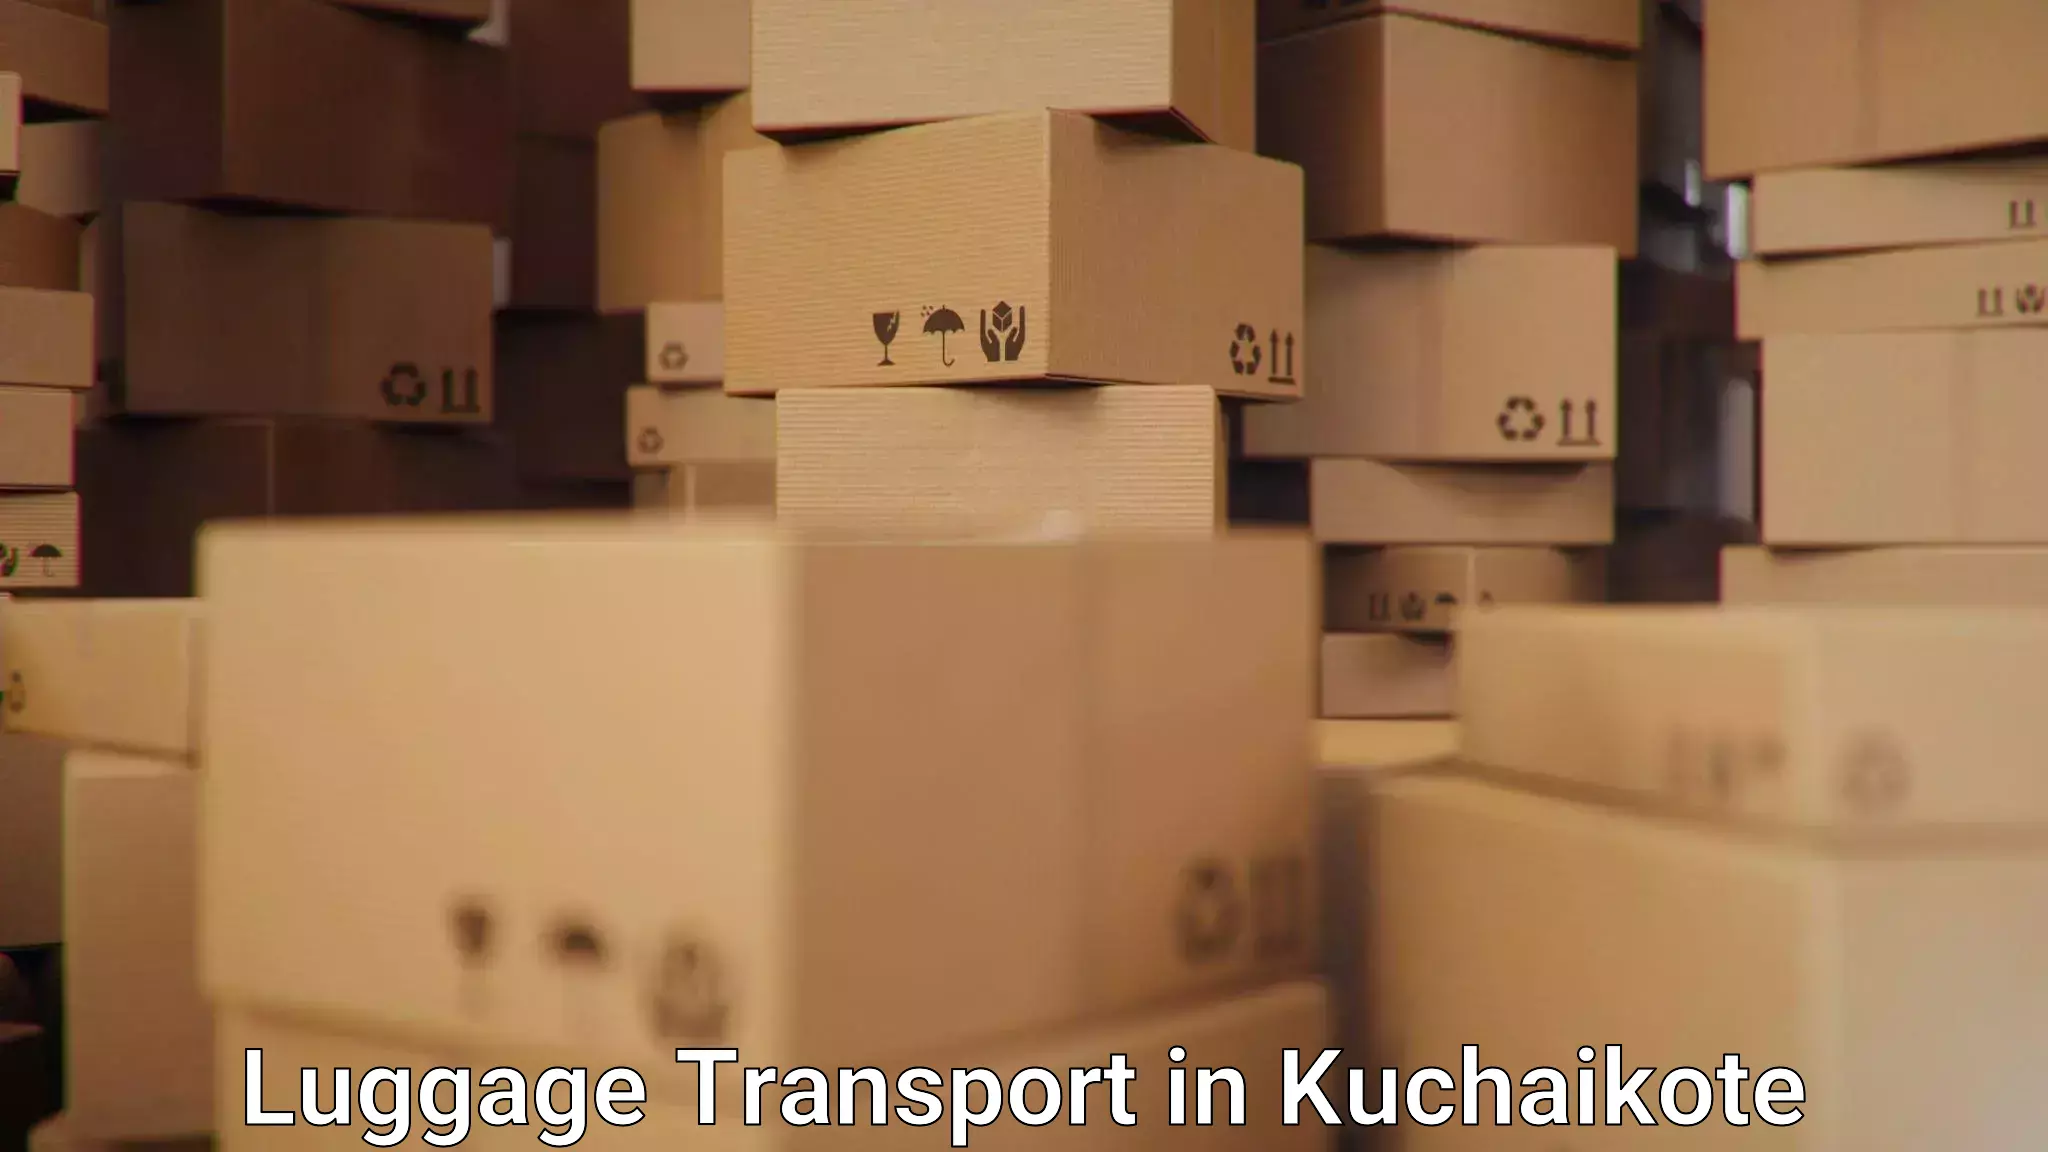 Excess baggage transport in Kuchaikote